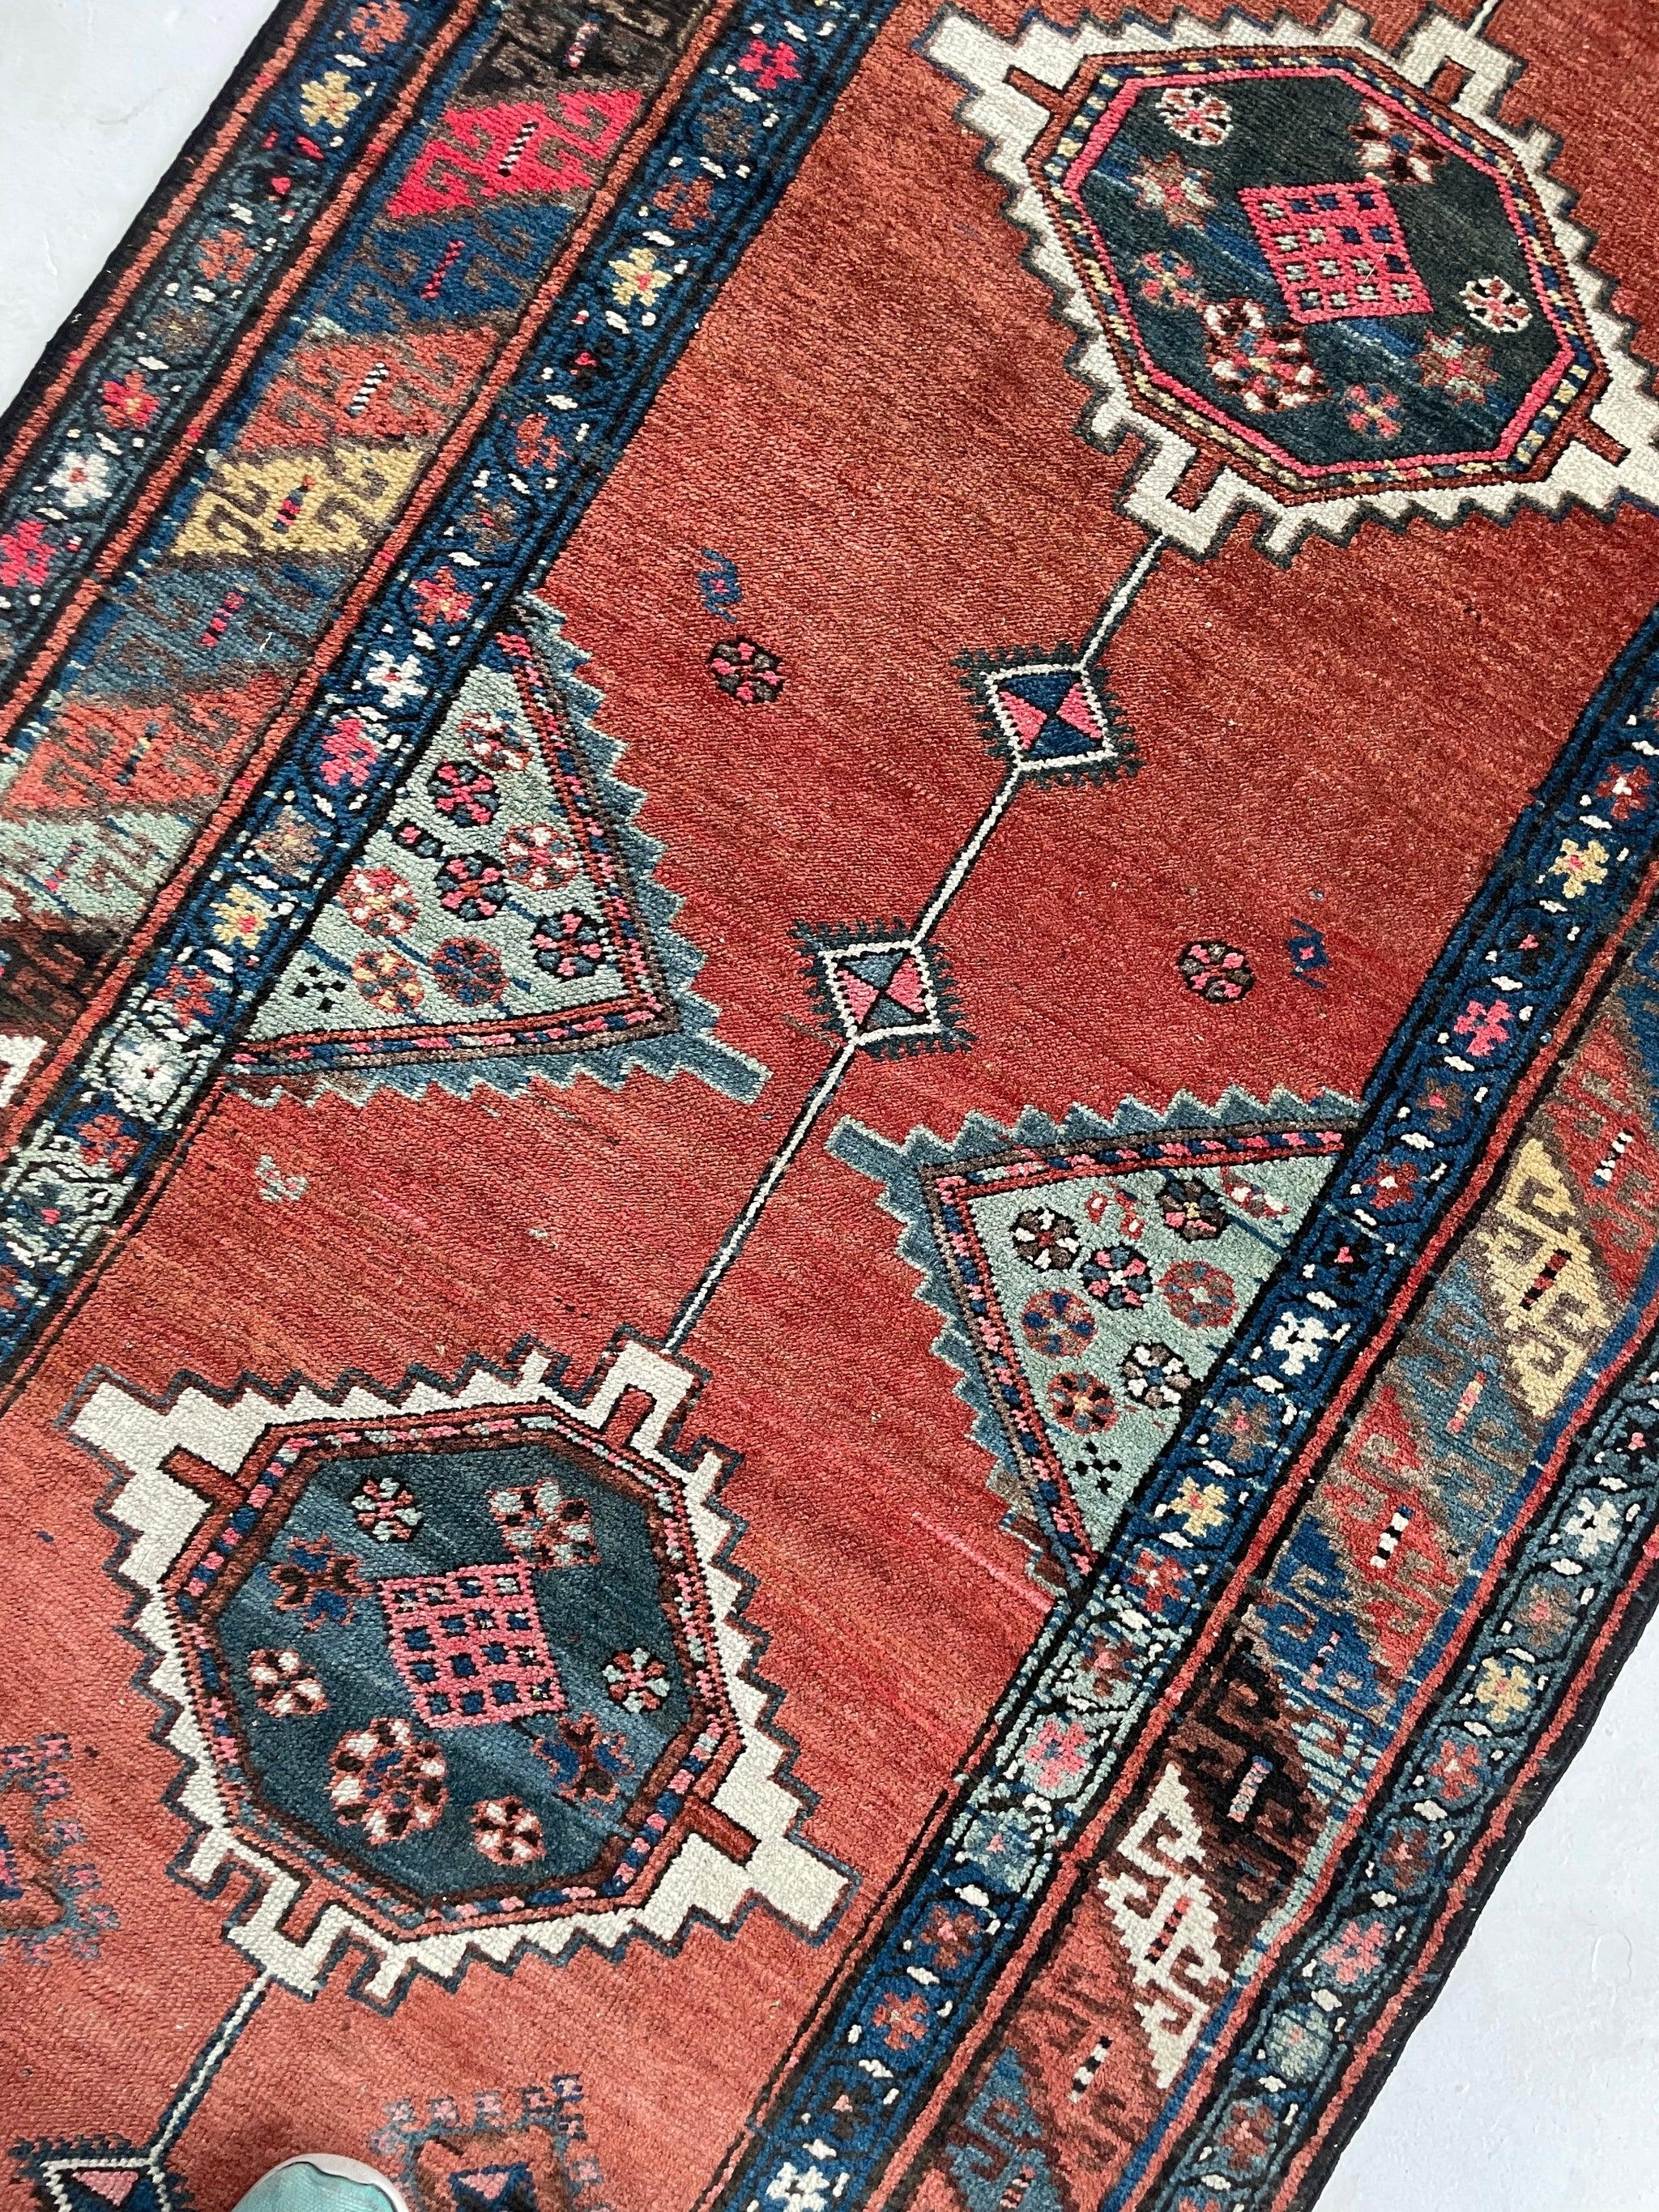 Tuscan Dream Long Antique Caucasian runner Clay, Amber, Umber, Denim, Walnut, Beige

About: Nomadic beauty! You will see the tuscan sunset and terrain all in one - this raw and super raw piece is woven in hand-spun wool with natural wool